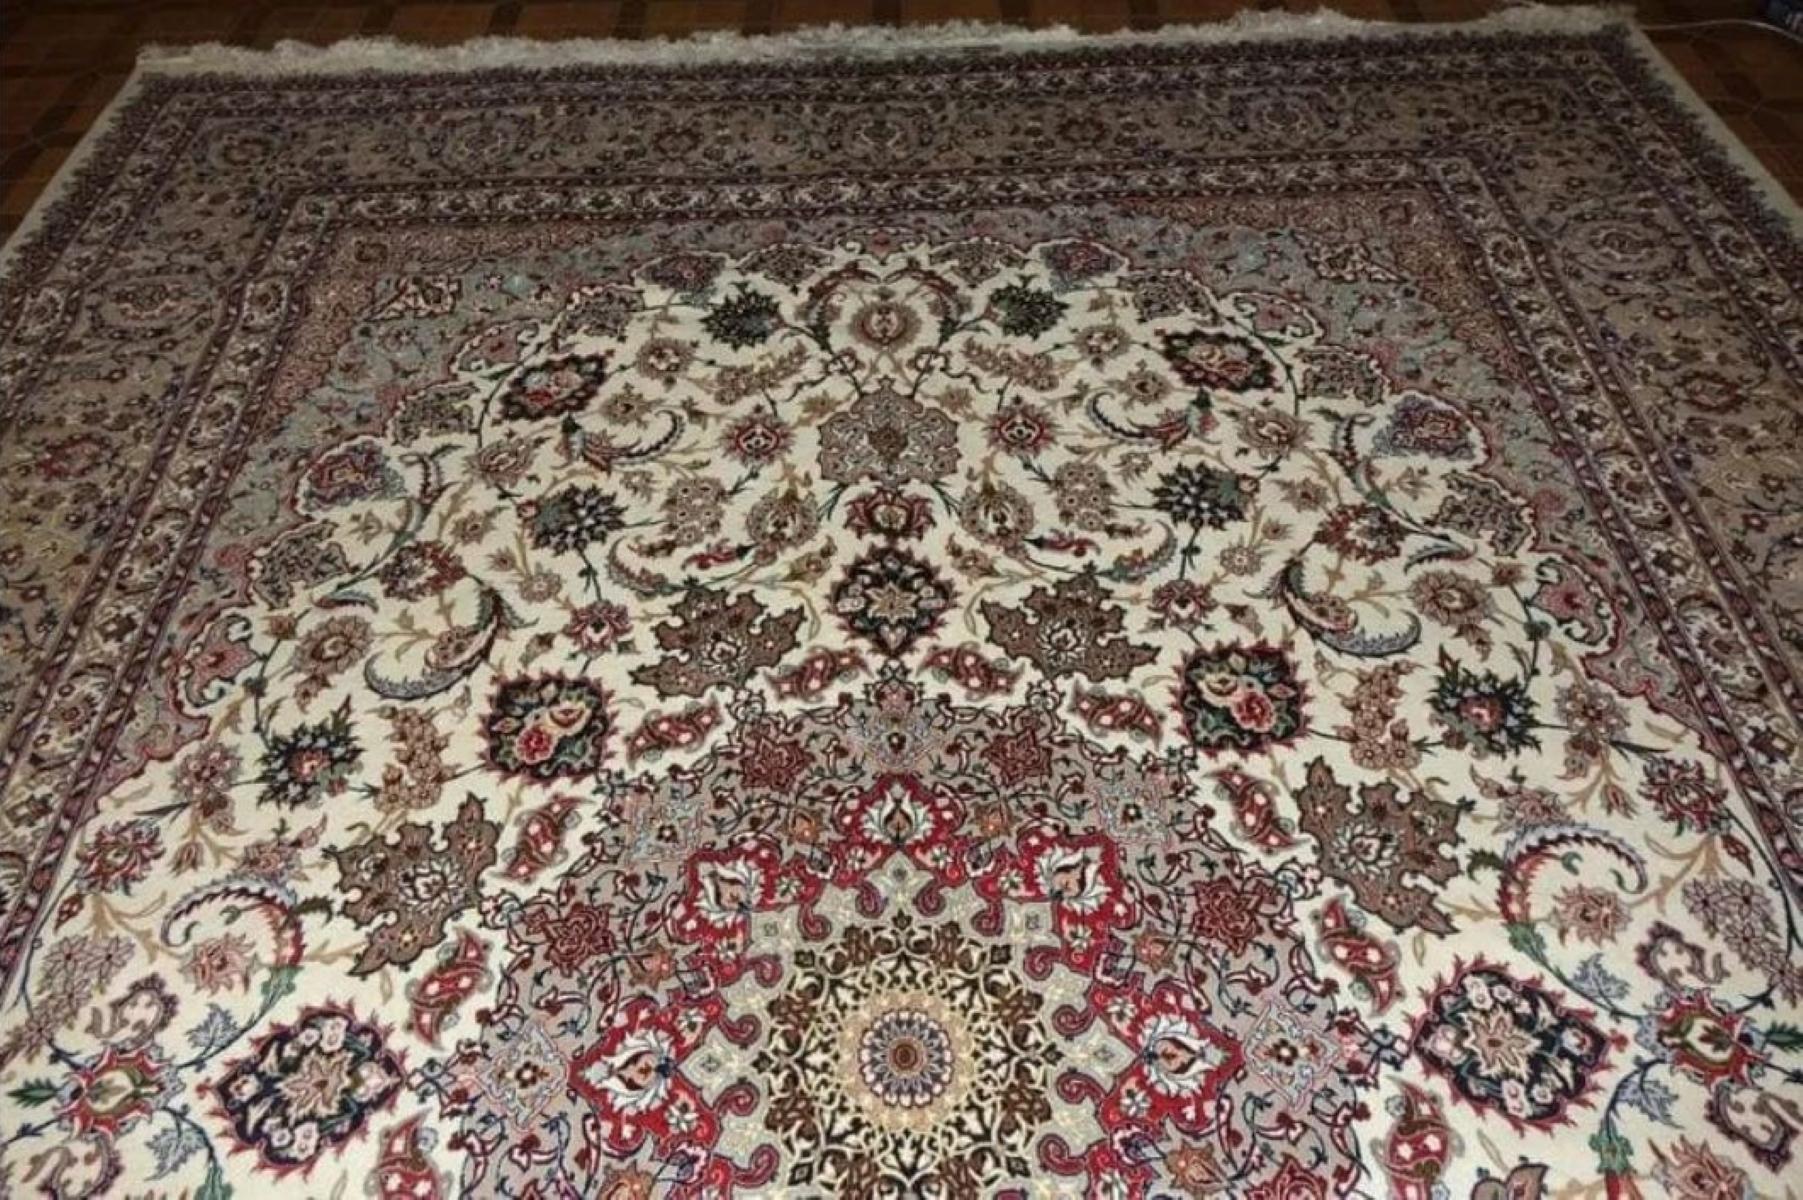 Very fine Persian Rug Isfahan 600 Knots per inch, Size 10 x 13 Iran Isfahan Mohsenfatehi  Wool and Silk with Silk Foundation. Around 11,000,000 knots tied by hand one by one. It takes 7 years to complete this piece of art.